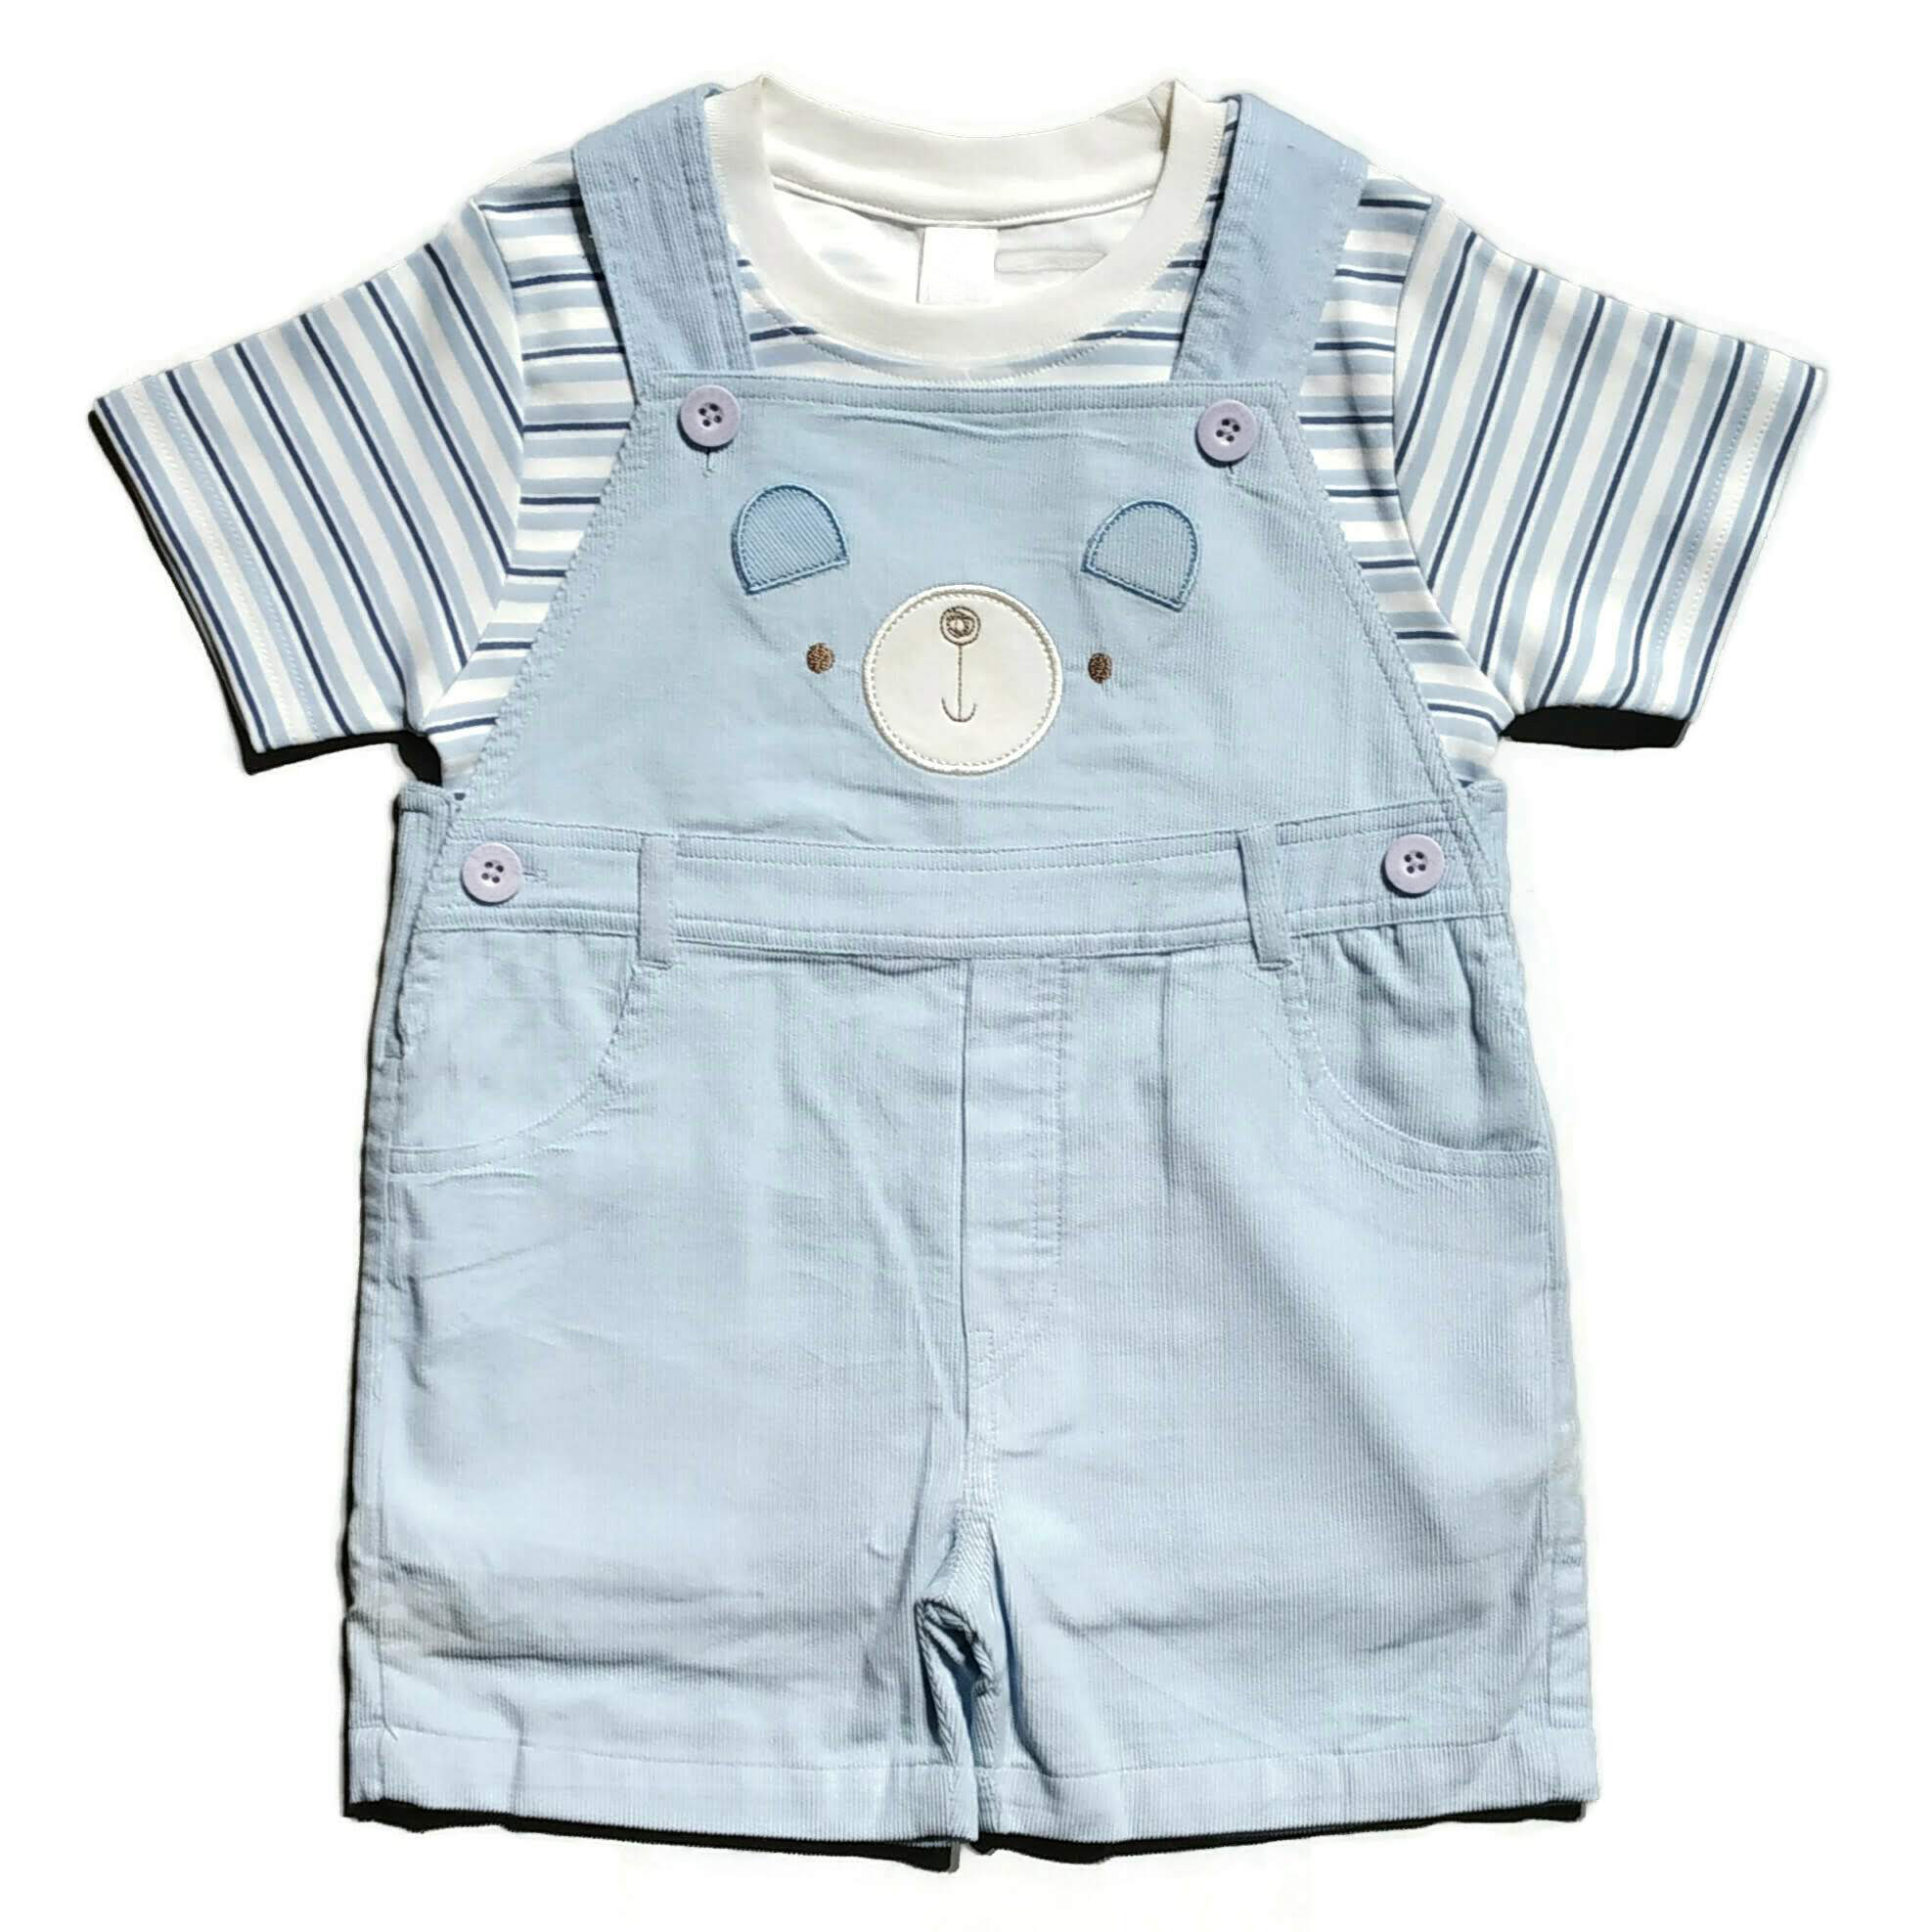 Modern Stylish Kids Dungarees ... | Rompers for kids, Kids dungarees,  Stylish kids